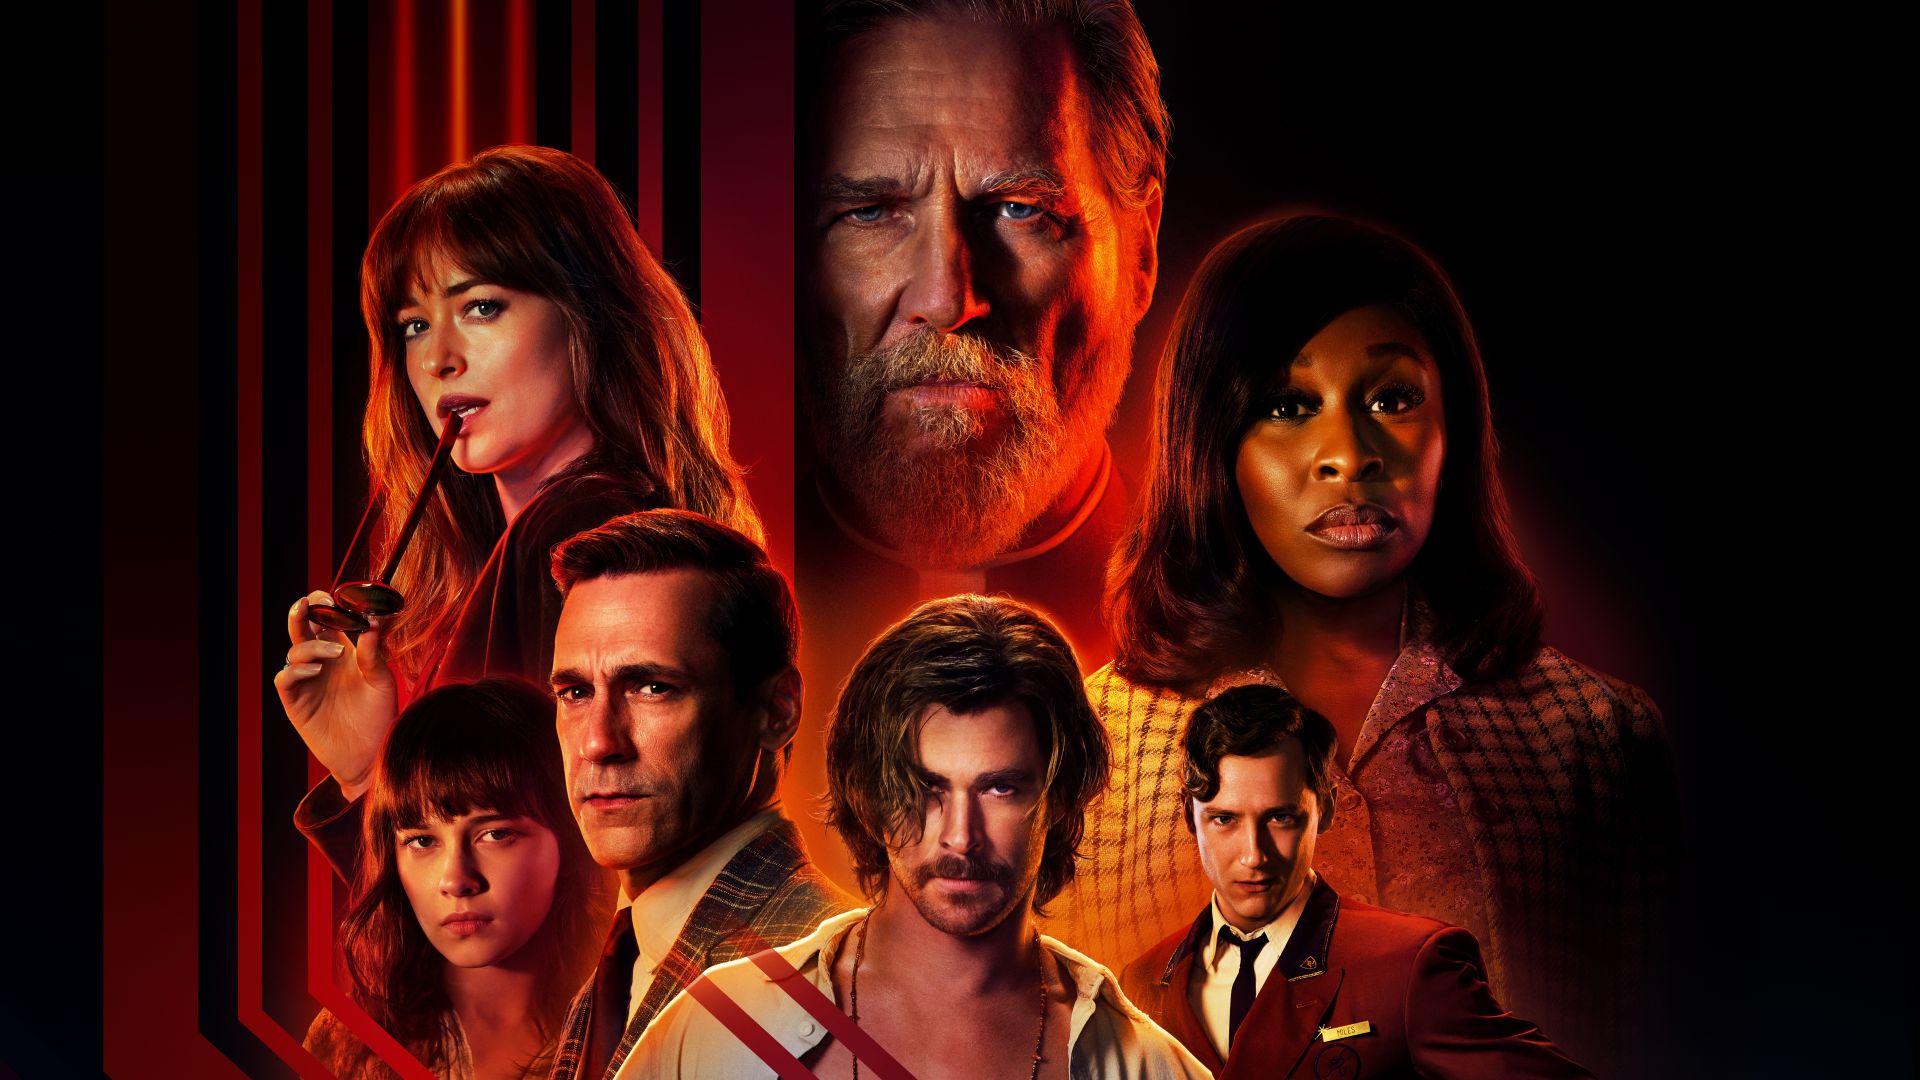 Bad Times at the El Royale Review: One of the smartest thrillers to come along in quite a while